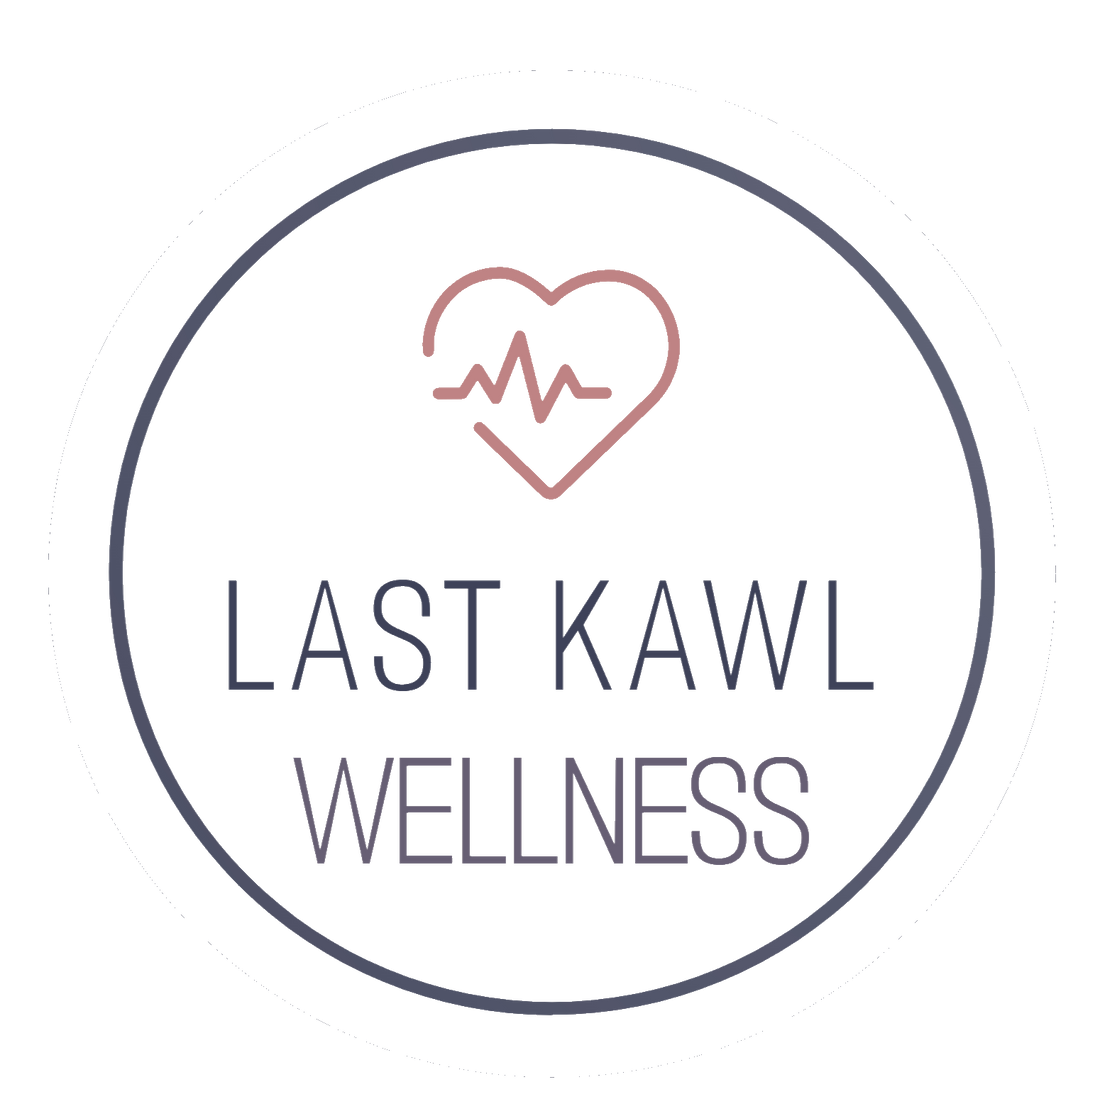 Welcome to Last KAWL Wellness: A Revolution in Holistic Health!